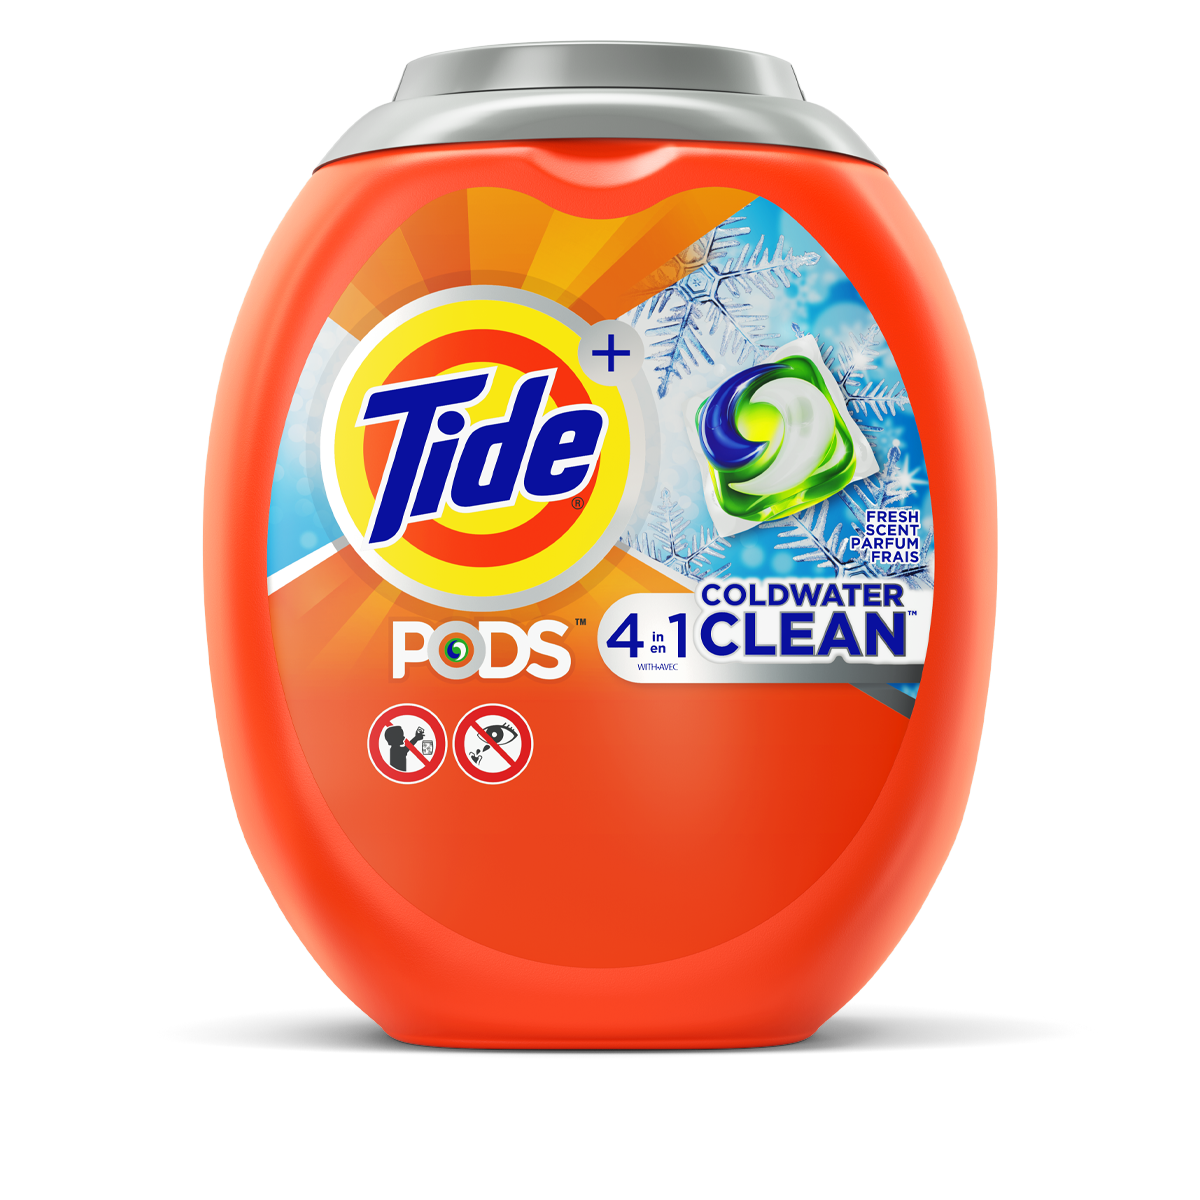 https://images.ctfassets.net/ajjw8wywicb3/4rVzZ288Y0lIyIMpa4kESa/4eee14cc6ad6979e667152168780566e/Tide_Pods_Tub_ColdwaterClean_72ct_v01_001_smpl_1200x1200.png